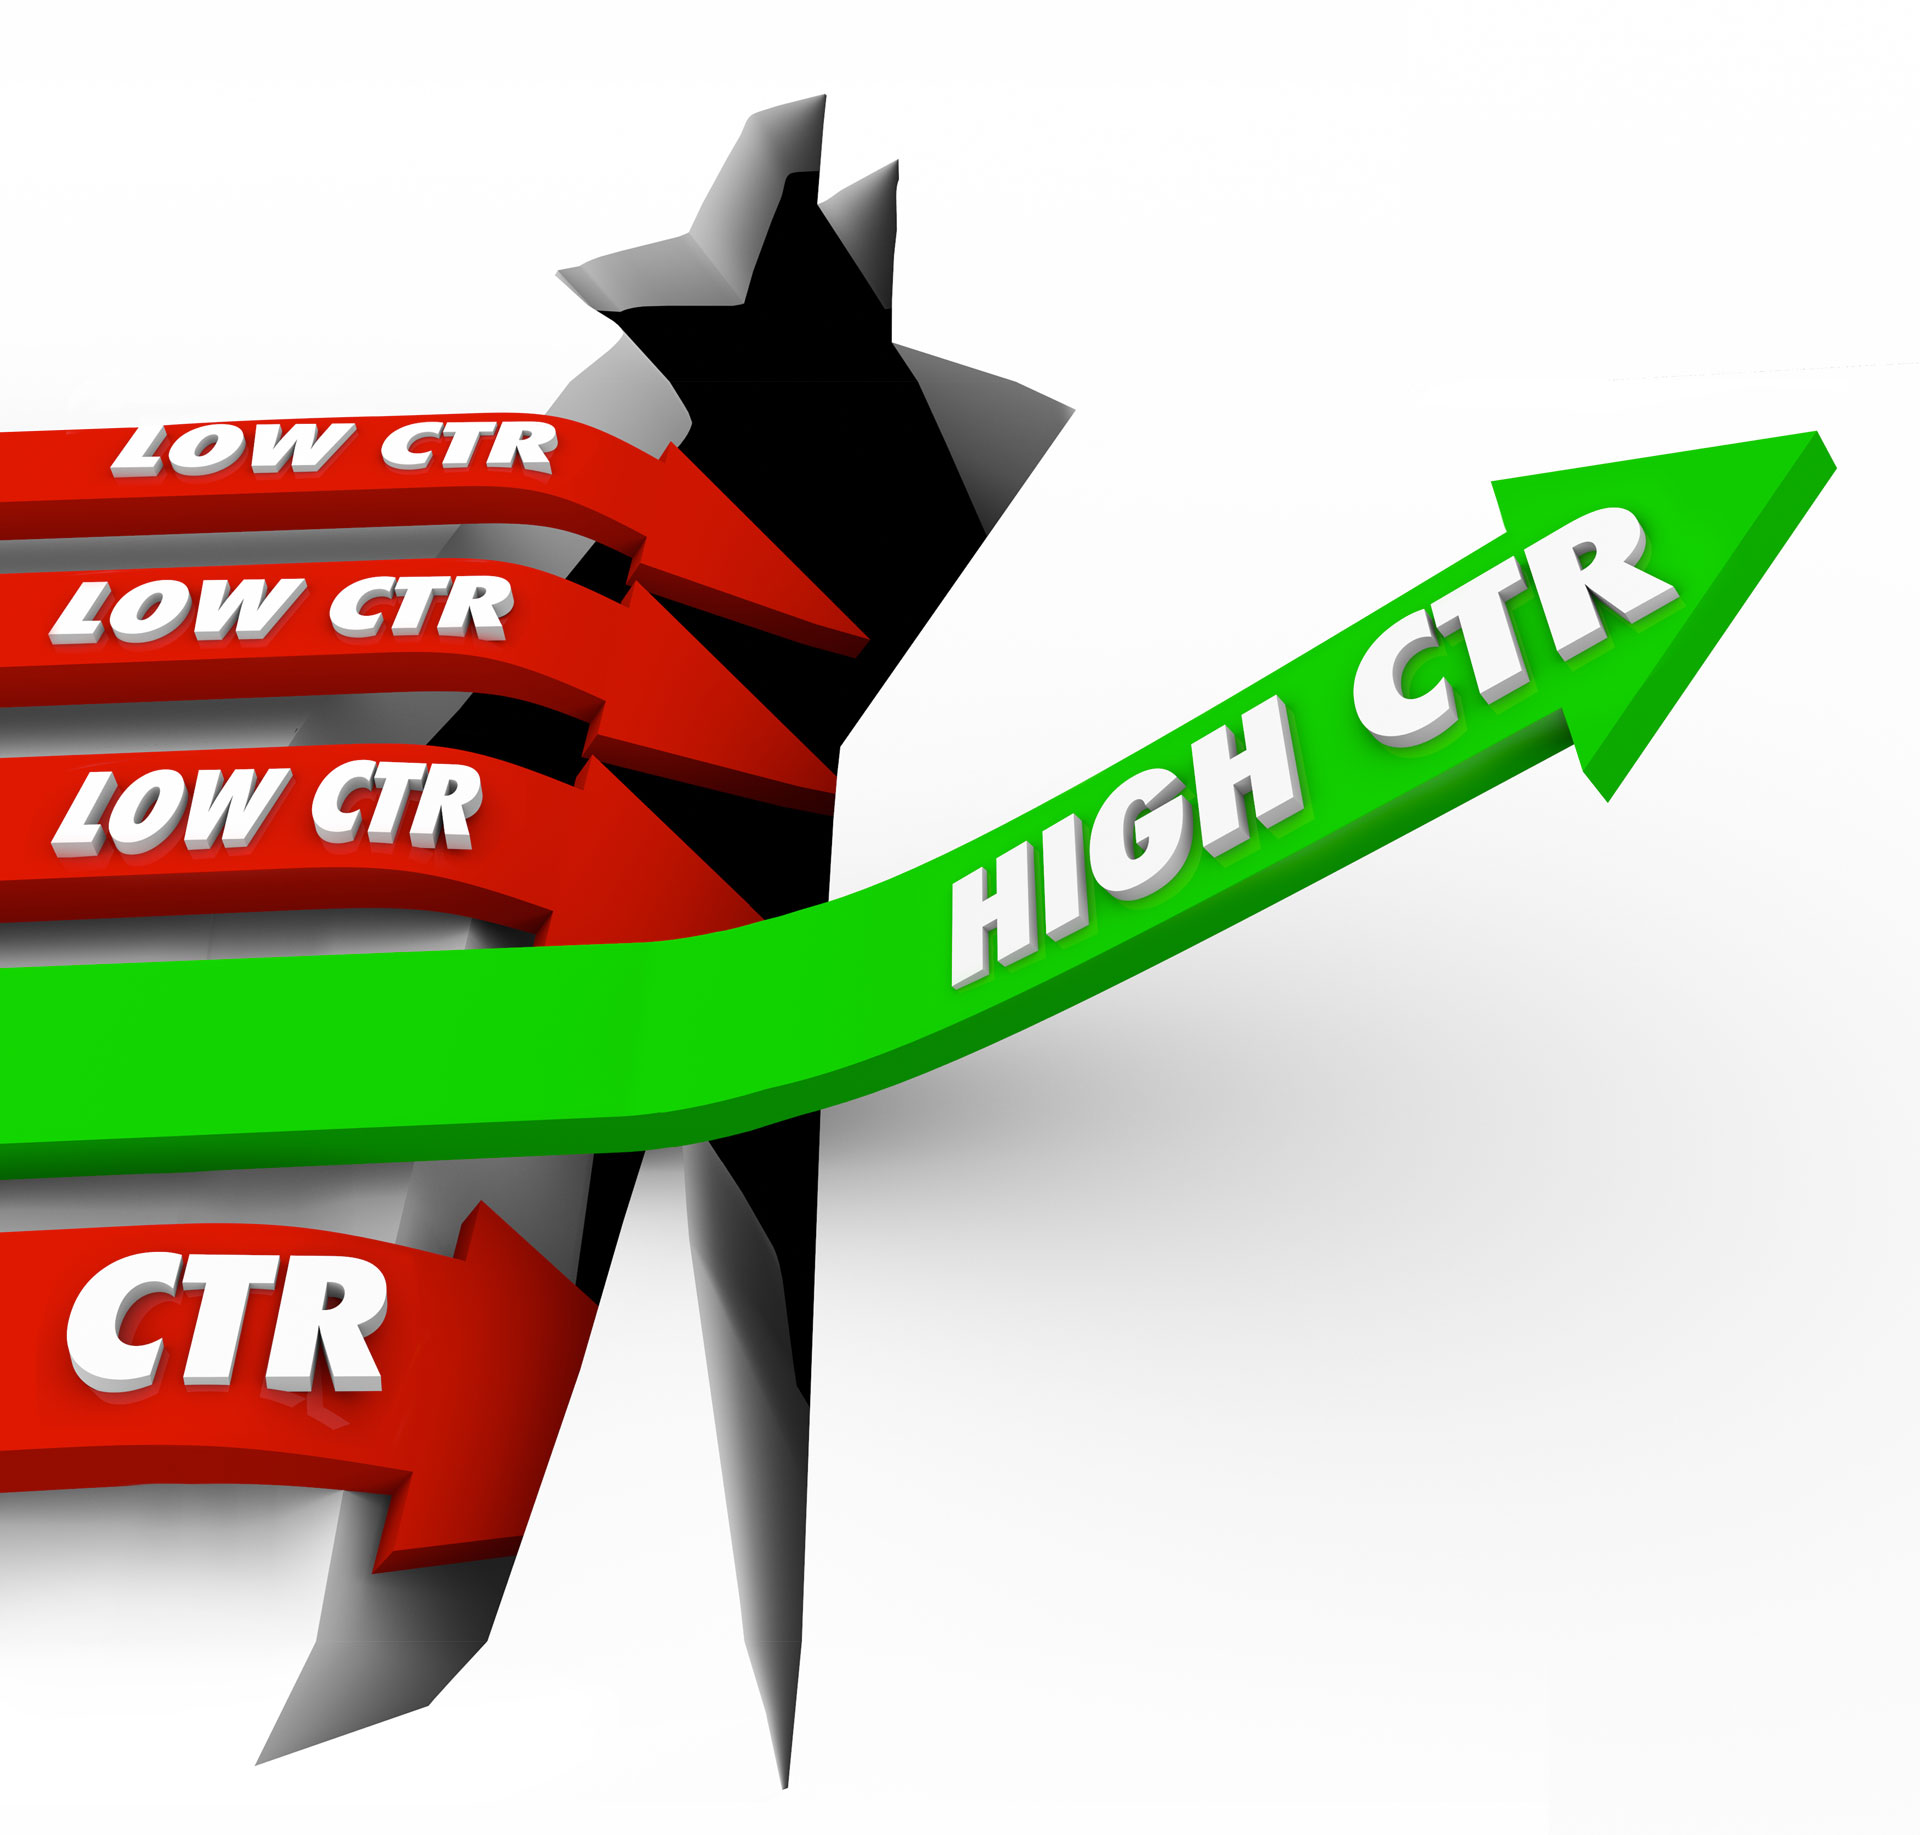 A green arrow with the text “High CTR”, going up